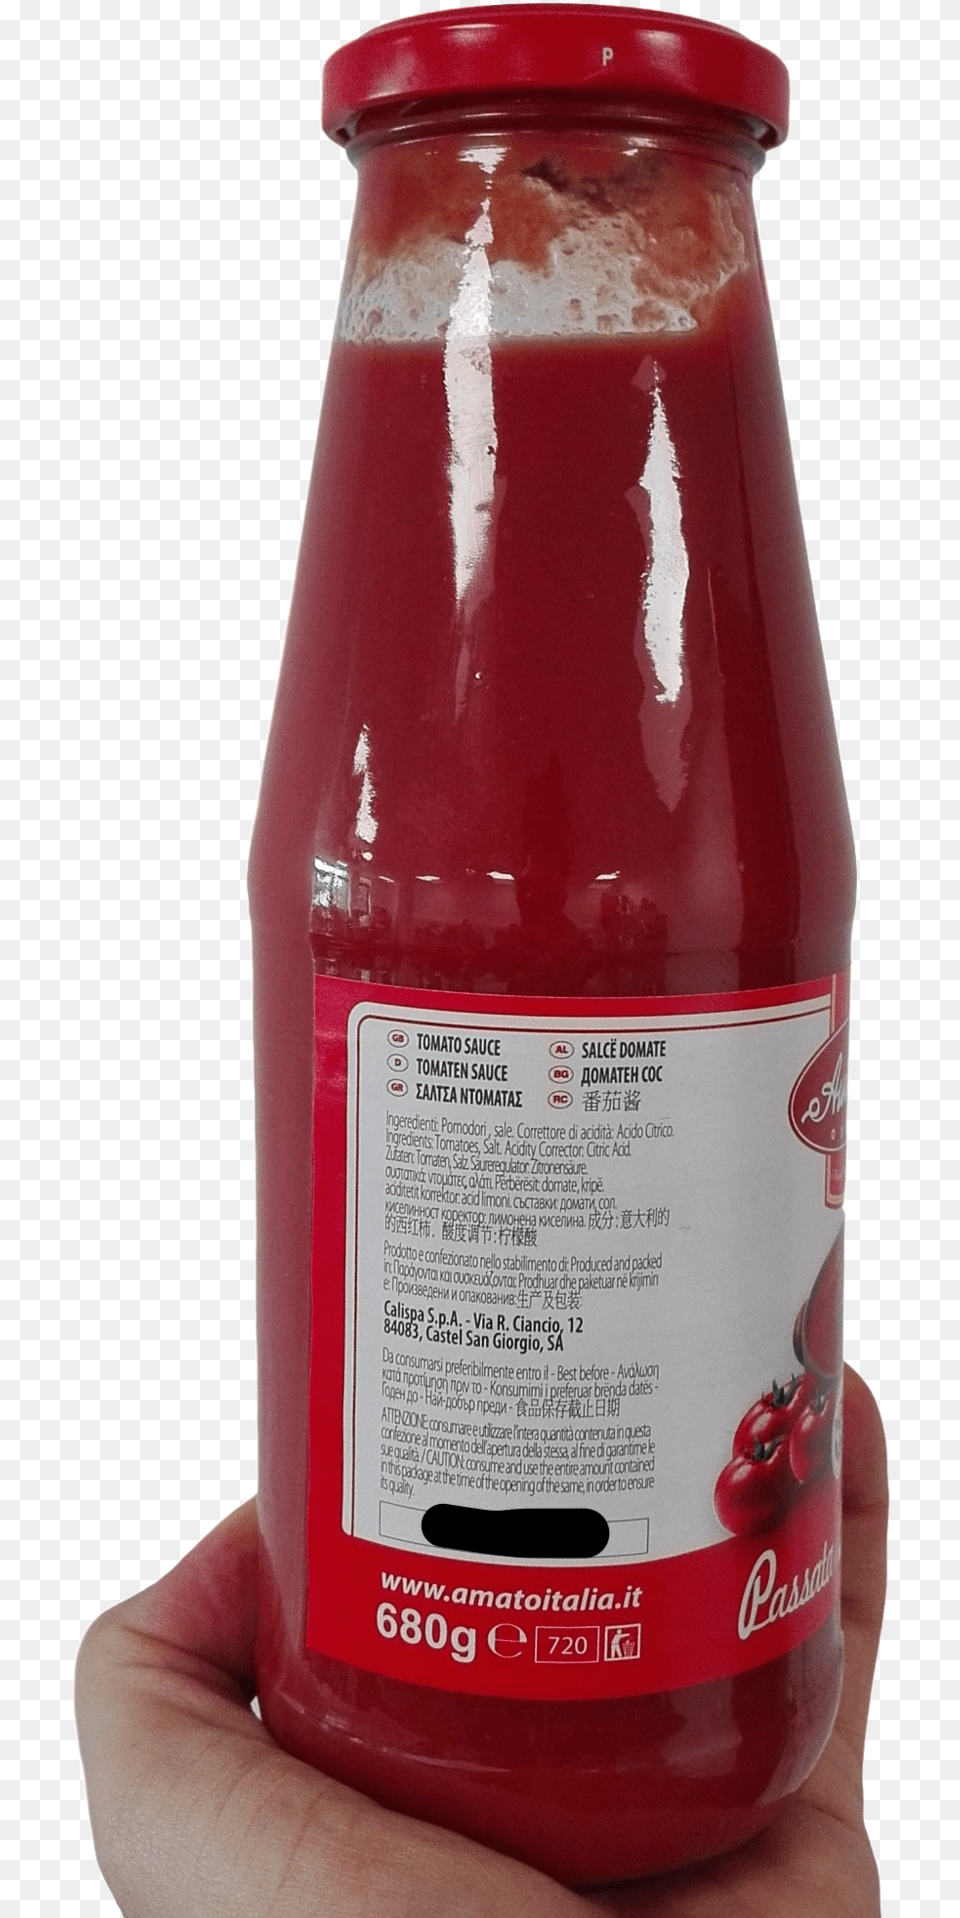 Amato Tomatoe Puree Passata Gr 680 In Glass Bottle Tomato Sauce, Food, Ketchup, Alcohol, Beer Png